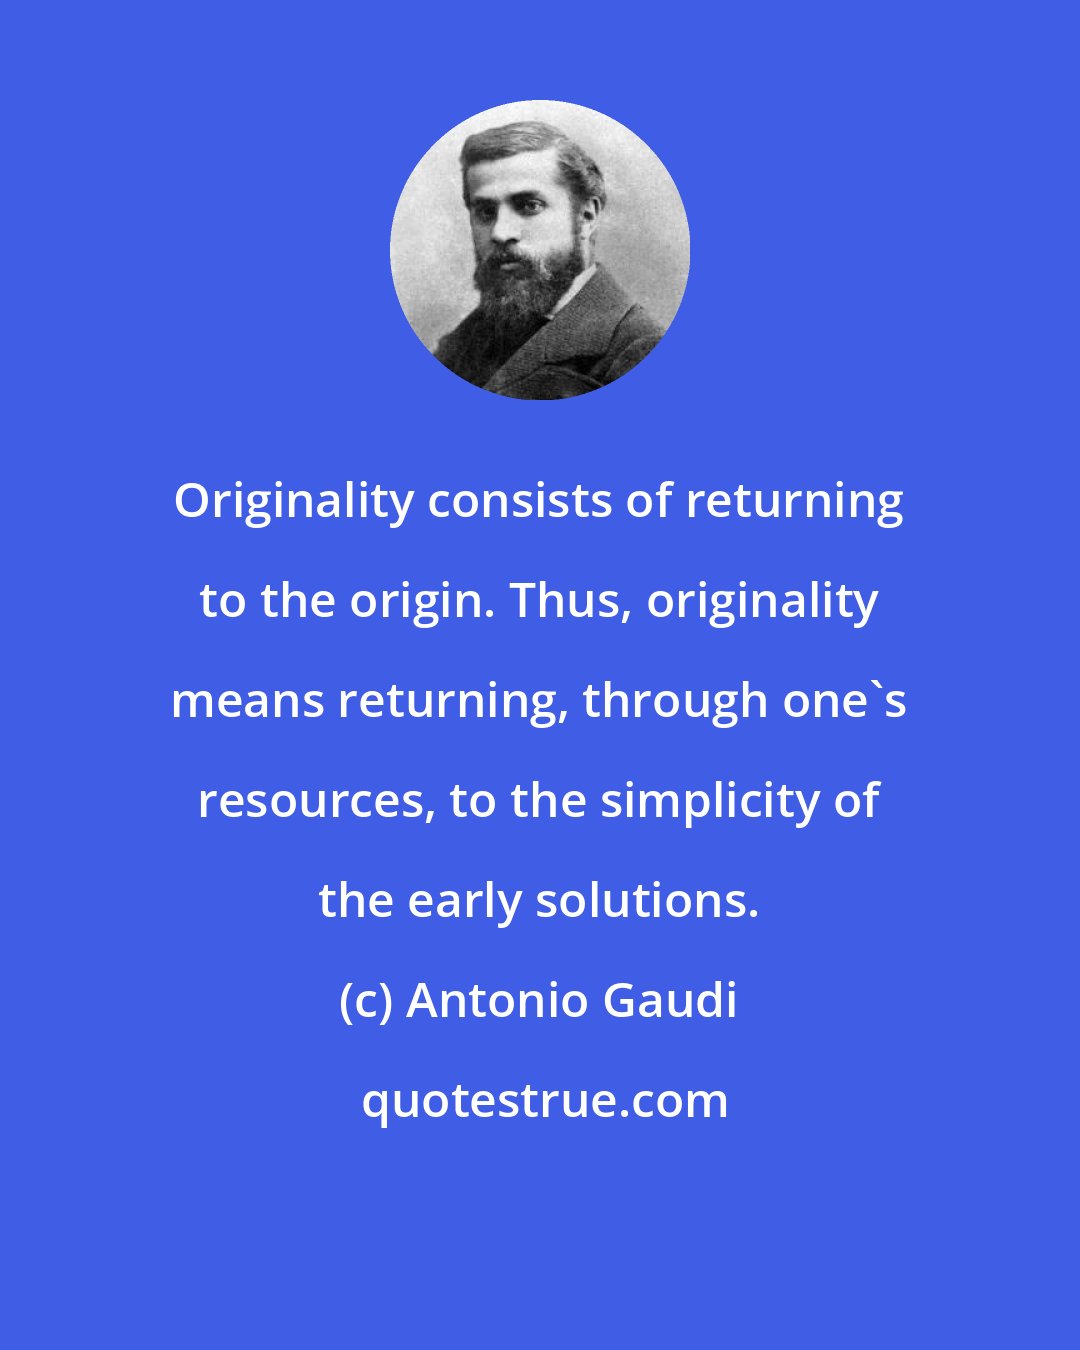 Antonio Gaudi: Originality consists of returning to the origin. Thus, originality means returning, through one's resources, to the simplicity of the early solutions.